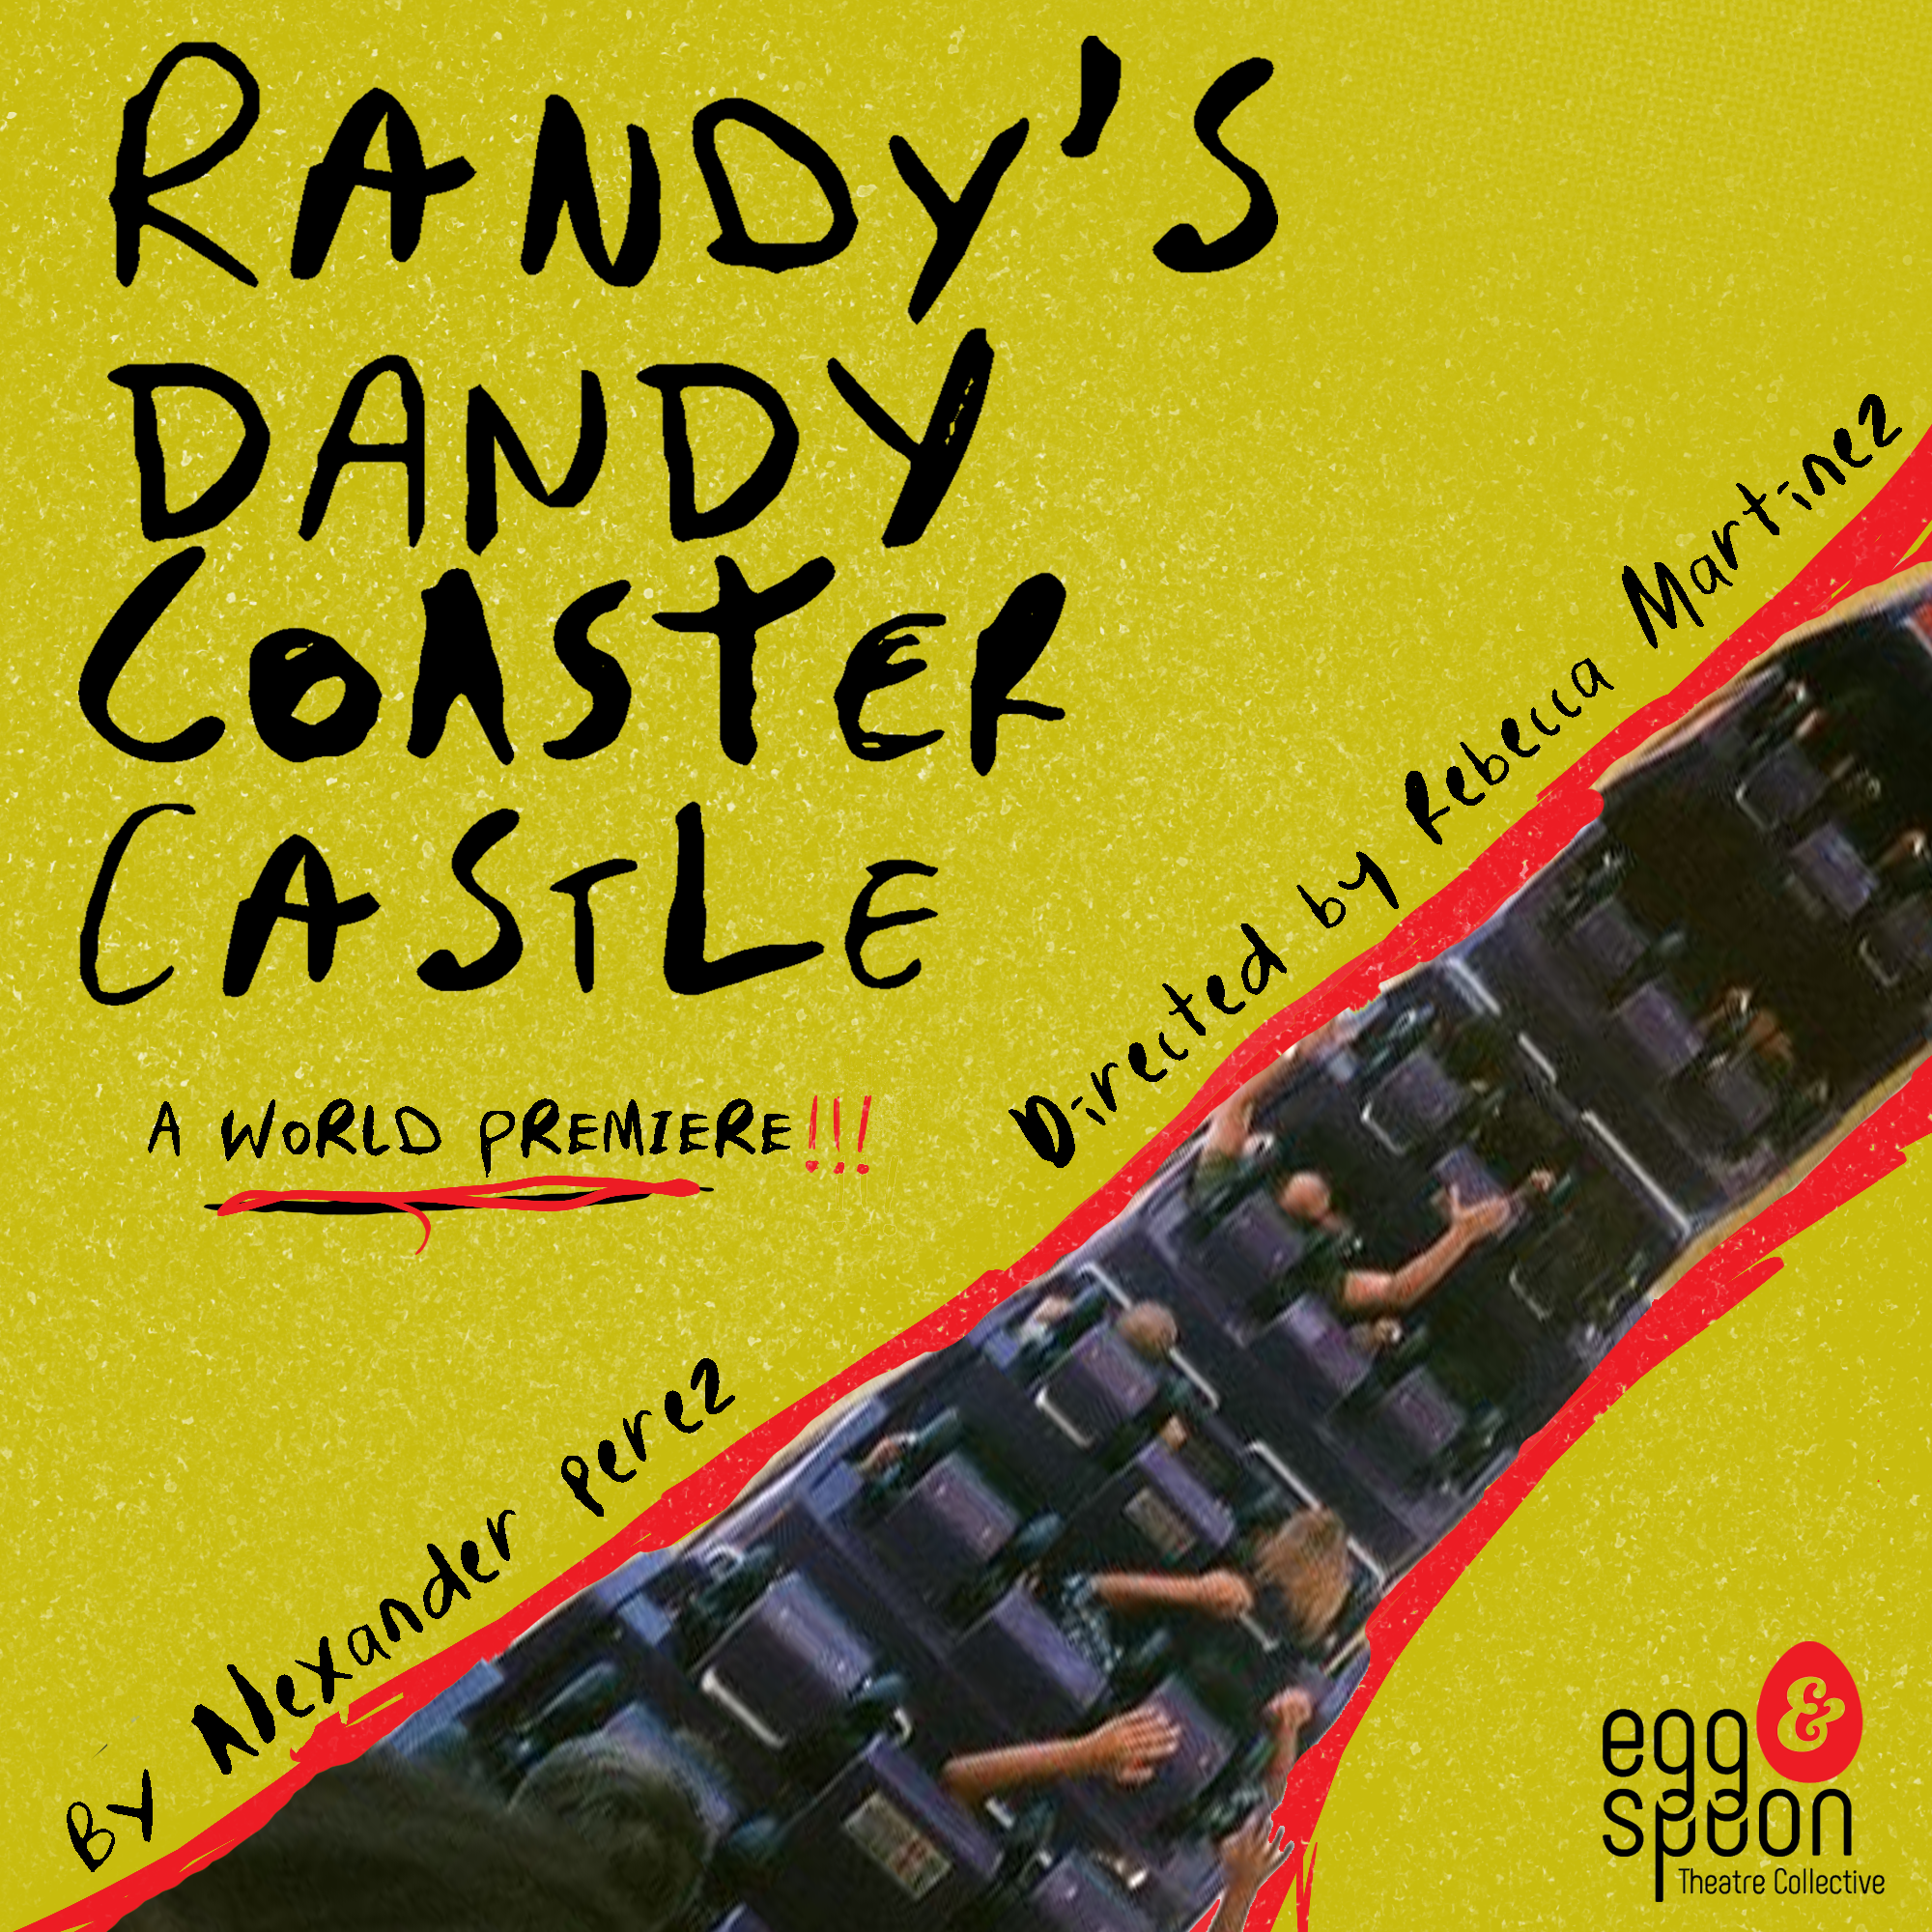 Logo for Randy's Dandy Coaster Castle. The image is split nearly in half with a picture of people riding a roller coaster. Many people have their arms raised. This image is outlined in red, stylized to appear to be hand drawn. On the diagonal on the left hand side, that same hand written font is used to write Randy's Dandy Coaster Castle, A World Premiere. It is written by Alexander Perez and Directed by Rebecca Martinez. In the lower right hand corner is the Egg & Spoon Theatre Collective logo,